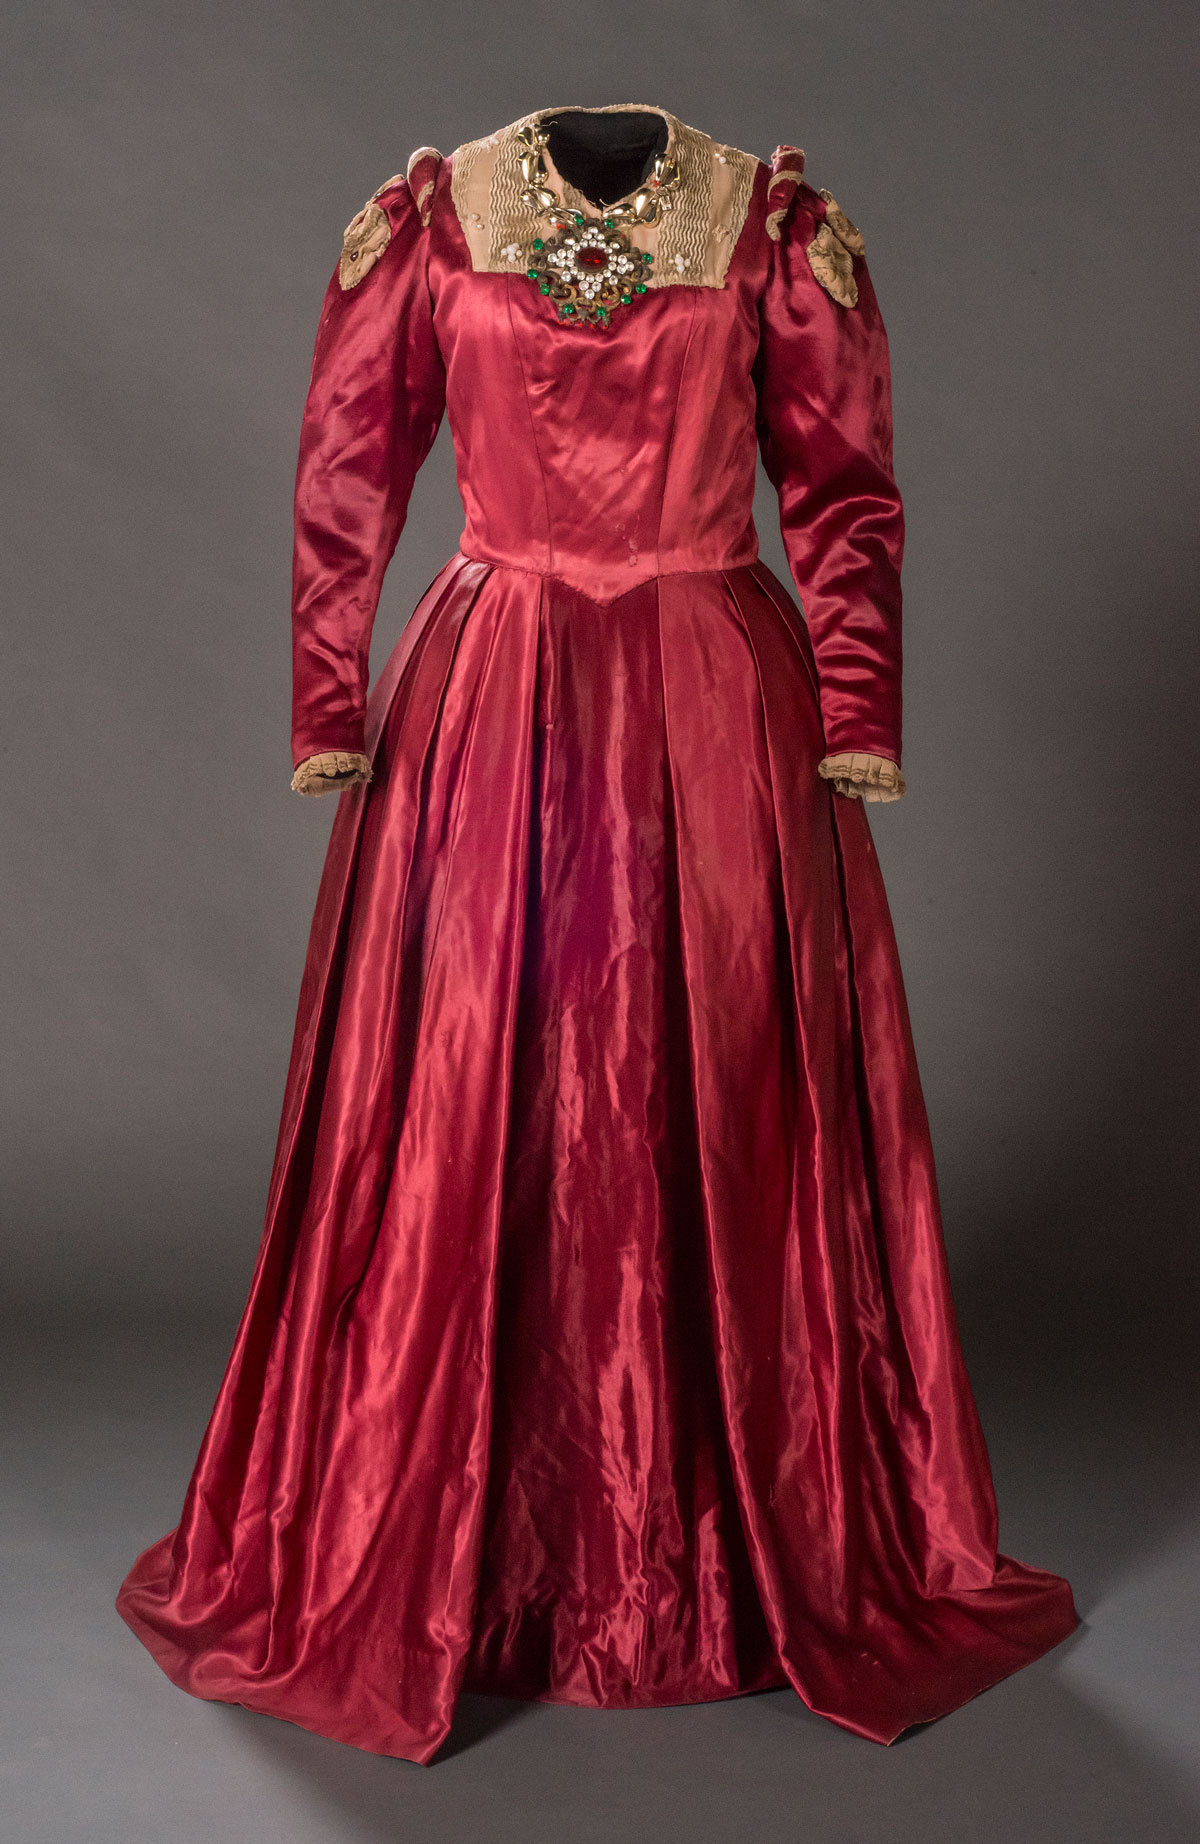 Unidentified maker. A gown worn by Rosalind Iden in the role of Beatrice in Much Ado about Nothing, ca. 1945 Textile, metal, and glass. Donald Wolfit Costume Collection, Harry Ransom Center Links from a gold-tone necklace owned by Rosalind Iden are sewn around the neckline of this gown. All of the costumes in the Wolfit archive bear marks of extensive wear, reuse, and repair, reflecting the constant use and hectic schedule of Wolfit's touring company. Because the company’s costumes were largely created or chosen for ease in traveling and interchangeability with various productions, they were not renowned for their opulence, innovation, or craft. Critic Caryl Brahms described a visit to the costume storage at Wolfit's offices as “a stock of dip-in-and-grab-one costumes ‘suitable for Shakespeare’ [that] are in a constant state of being repaired.”